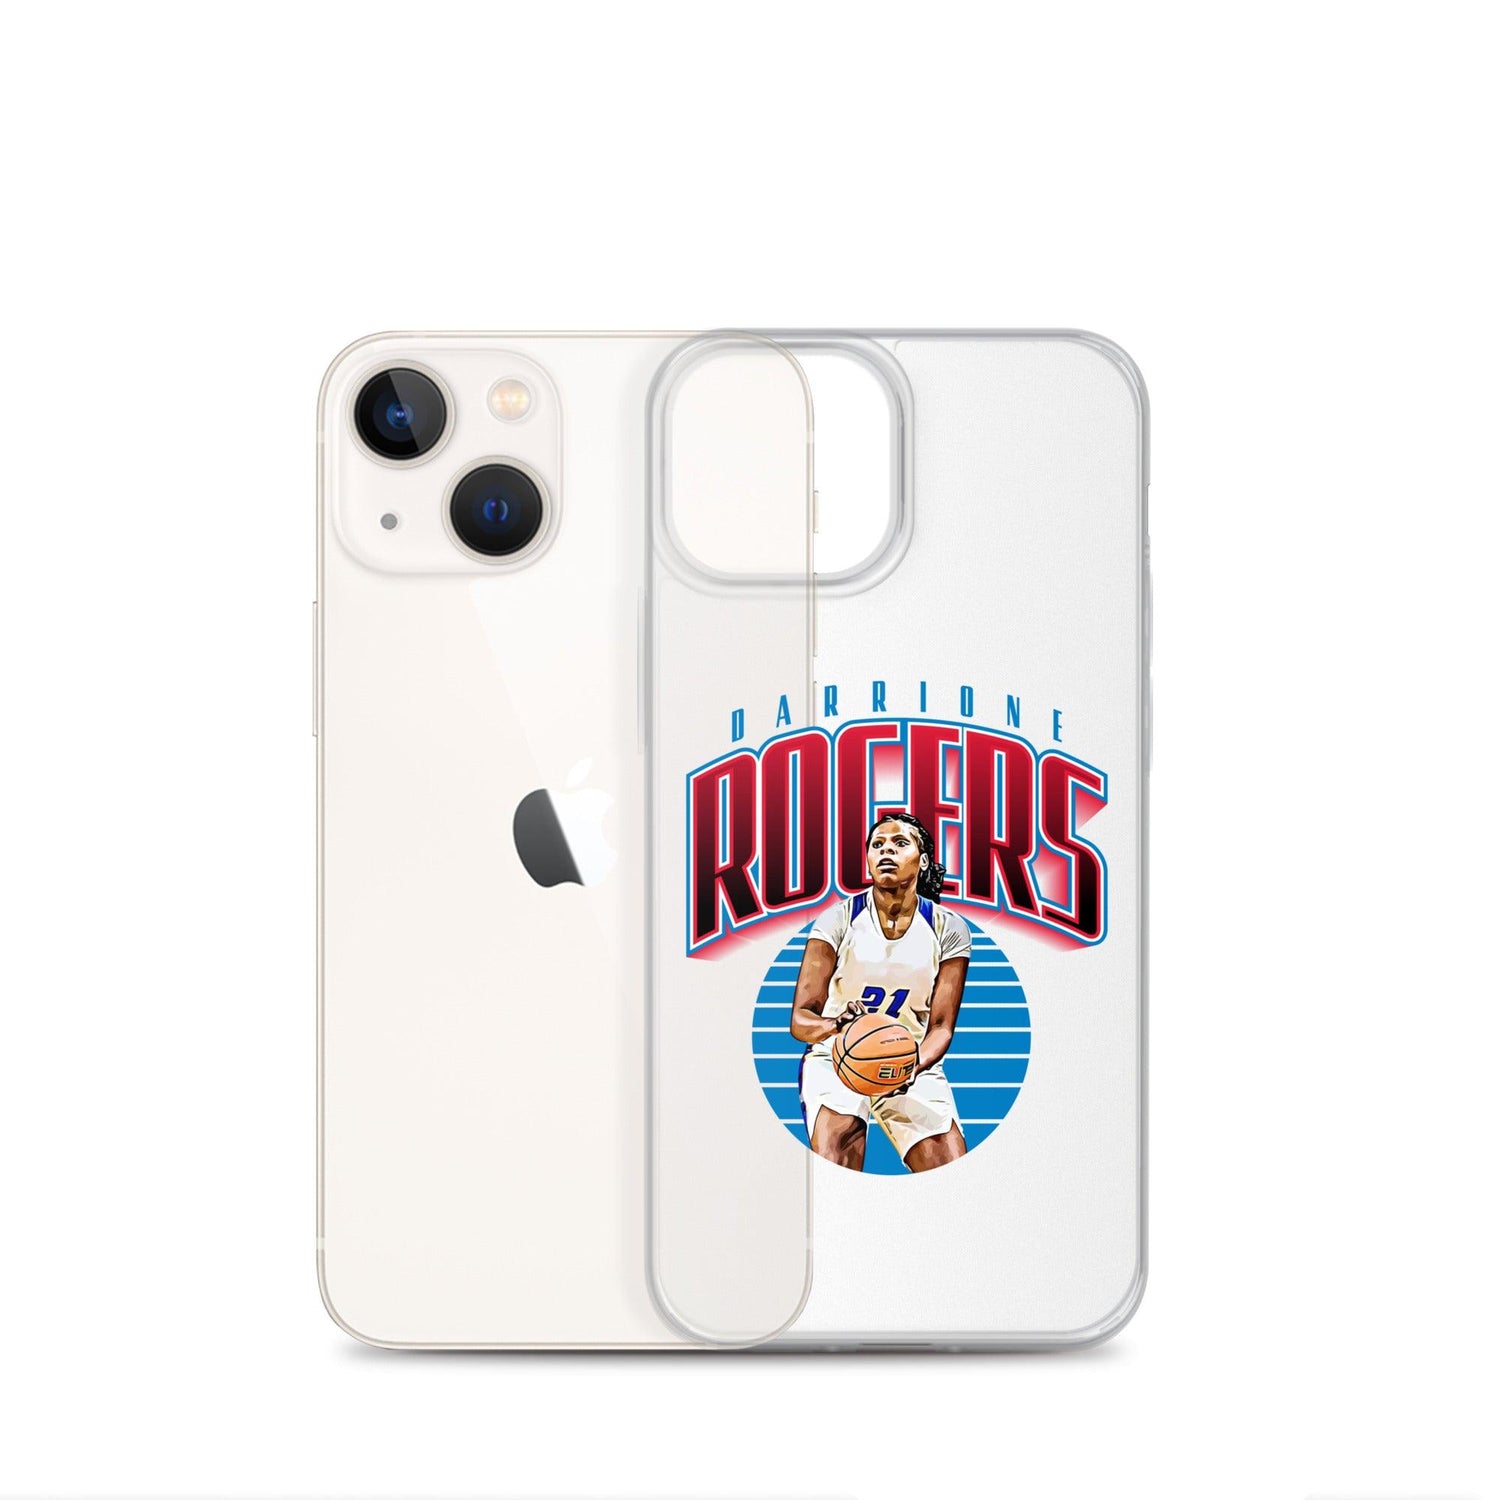 Darrione Rogers "Gameday" iPhone Case - Fan Arch